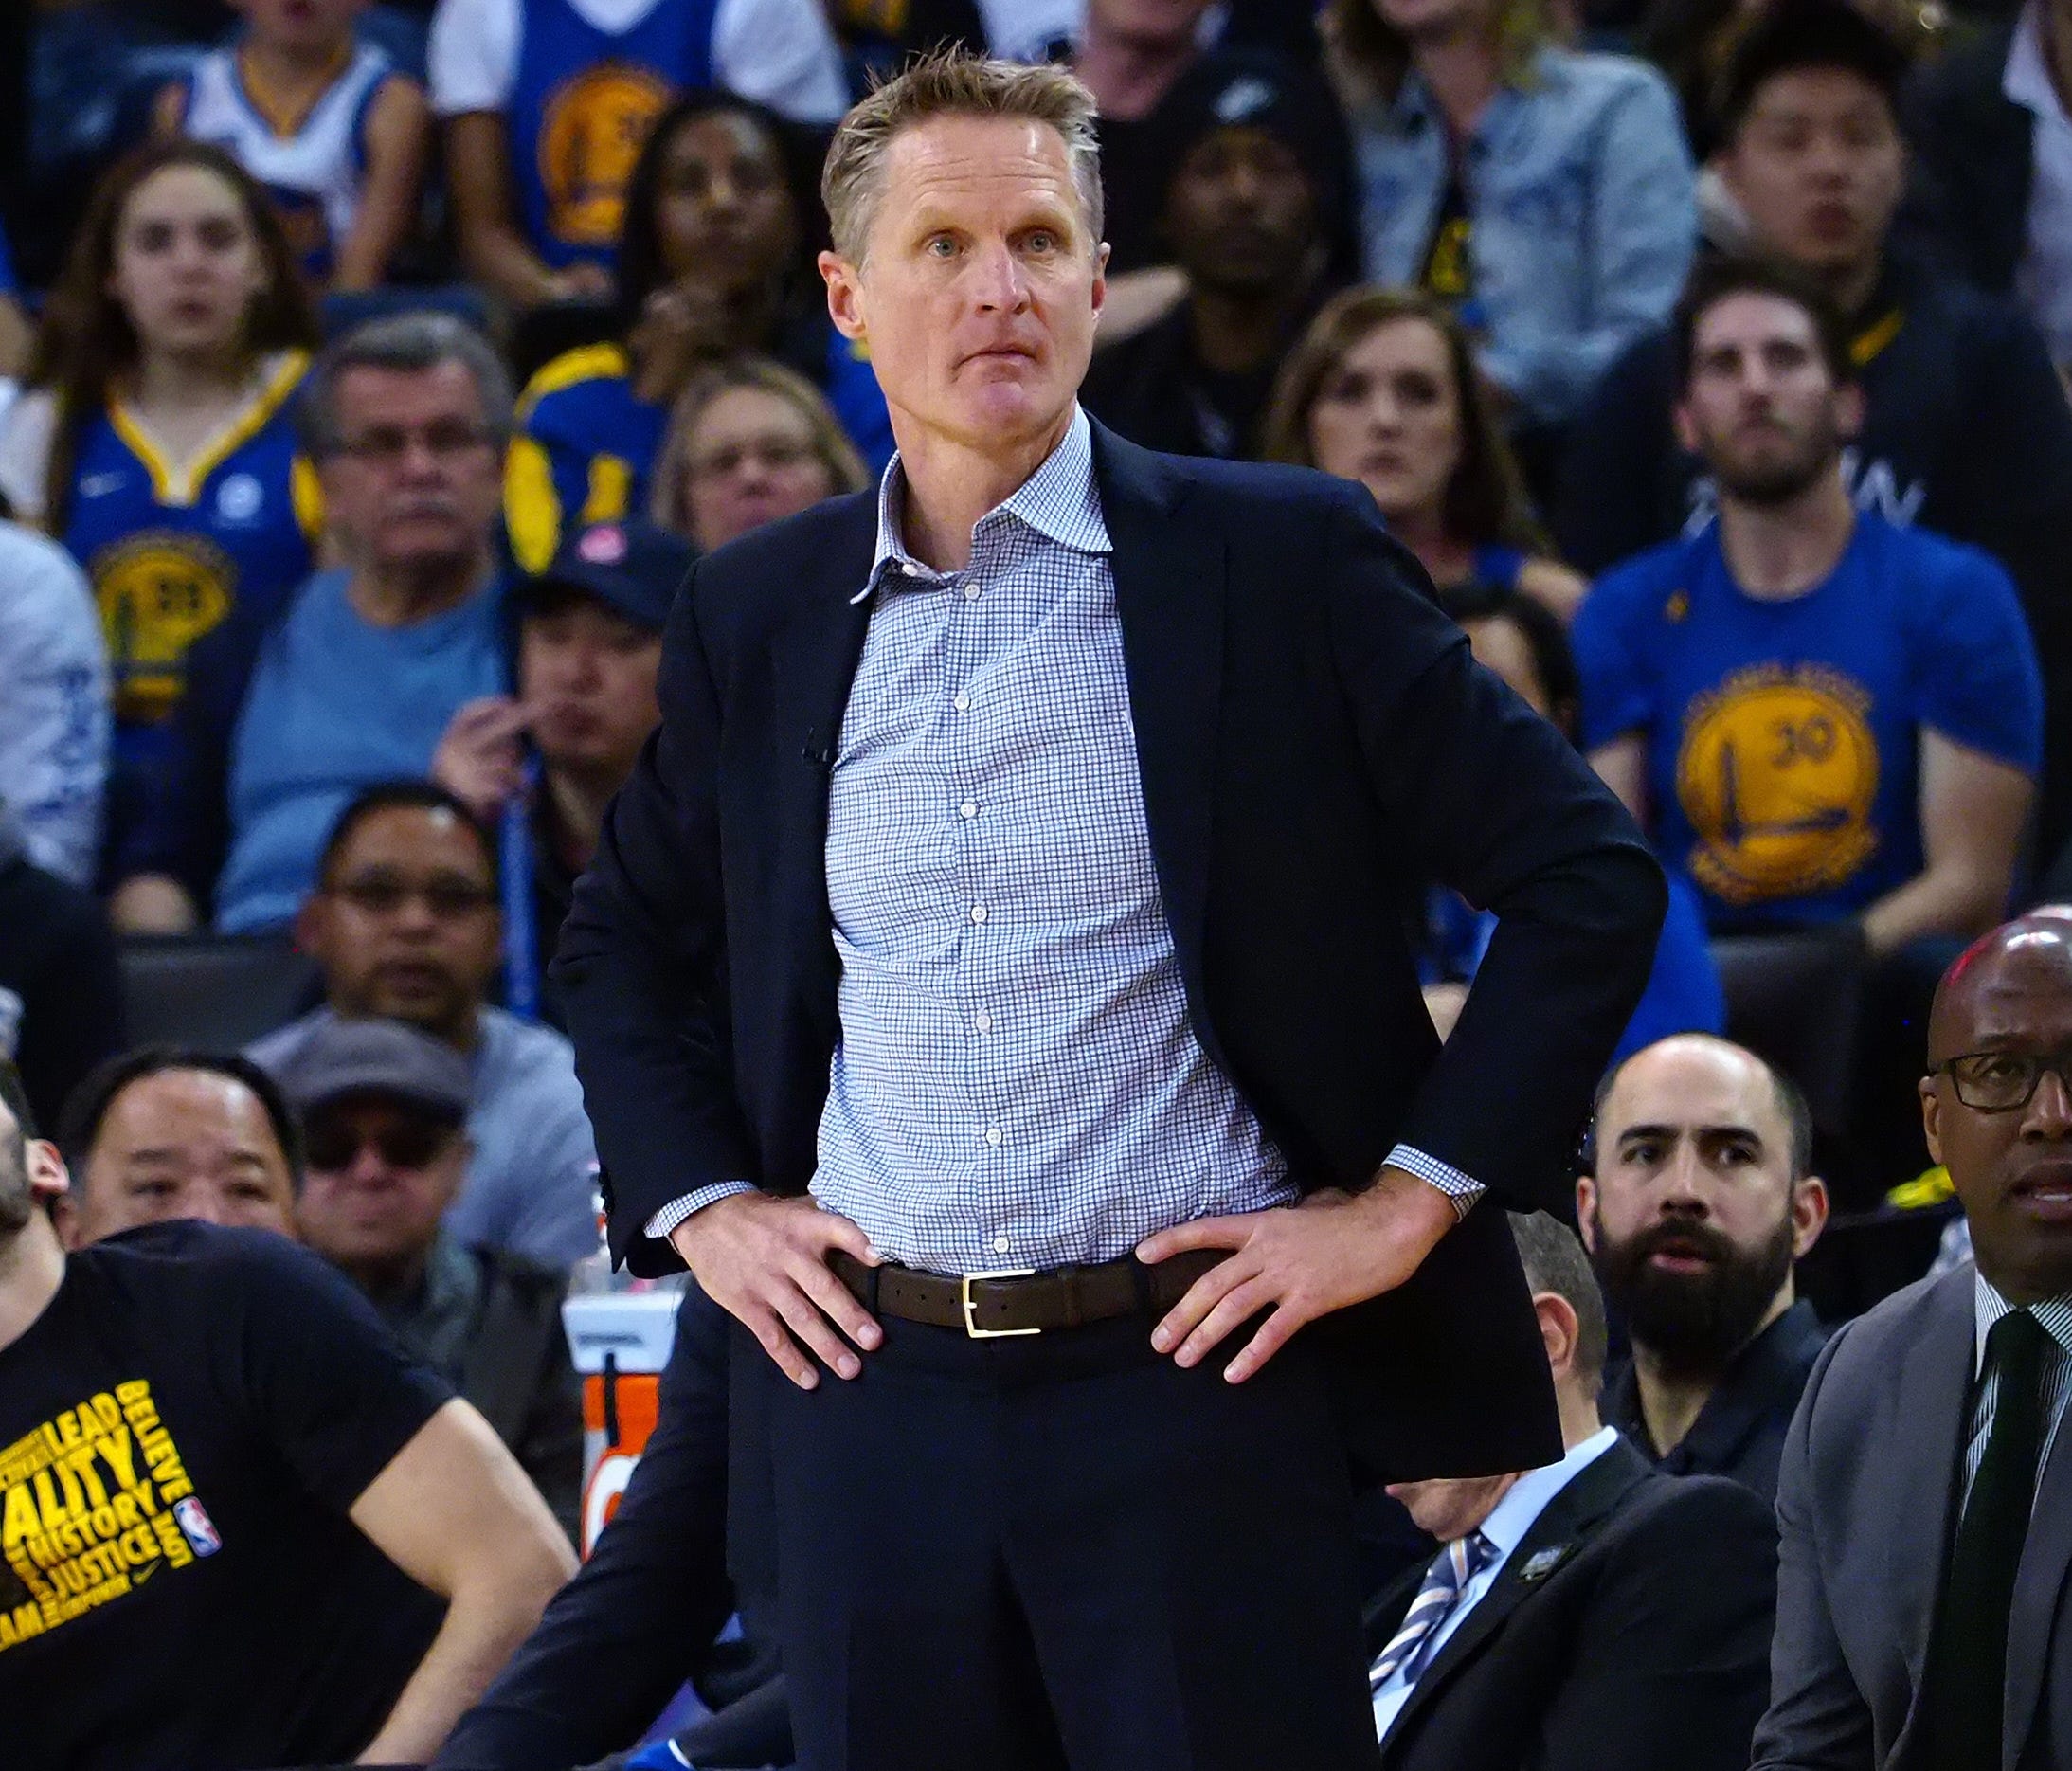 Golden State Warriors head coach Steve Kerr on the sideline against the San Antonio Spurs during the first quarter at Oracle Arena.